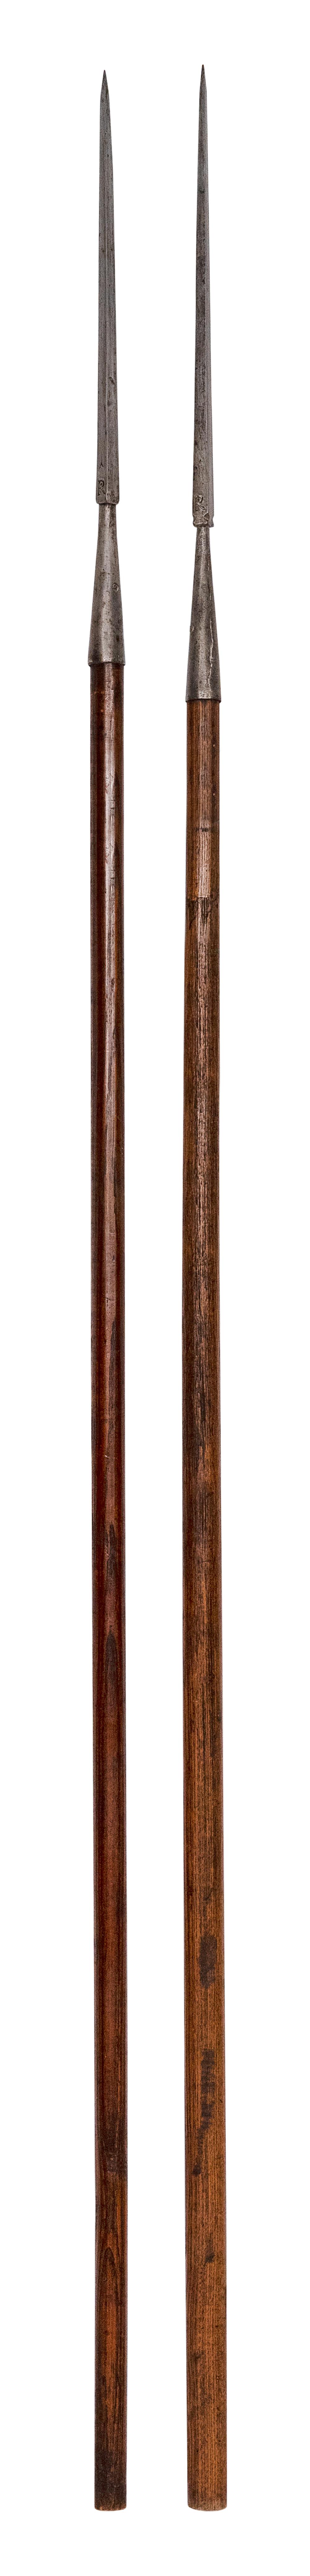 TWO BOARDING PIKES PROBABLY ENGLAND  34f0b0